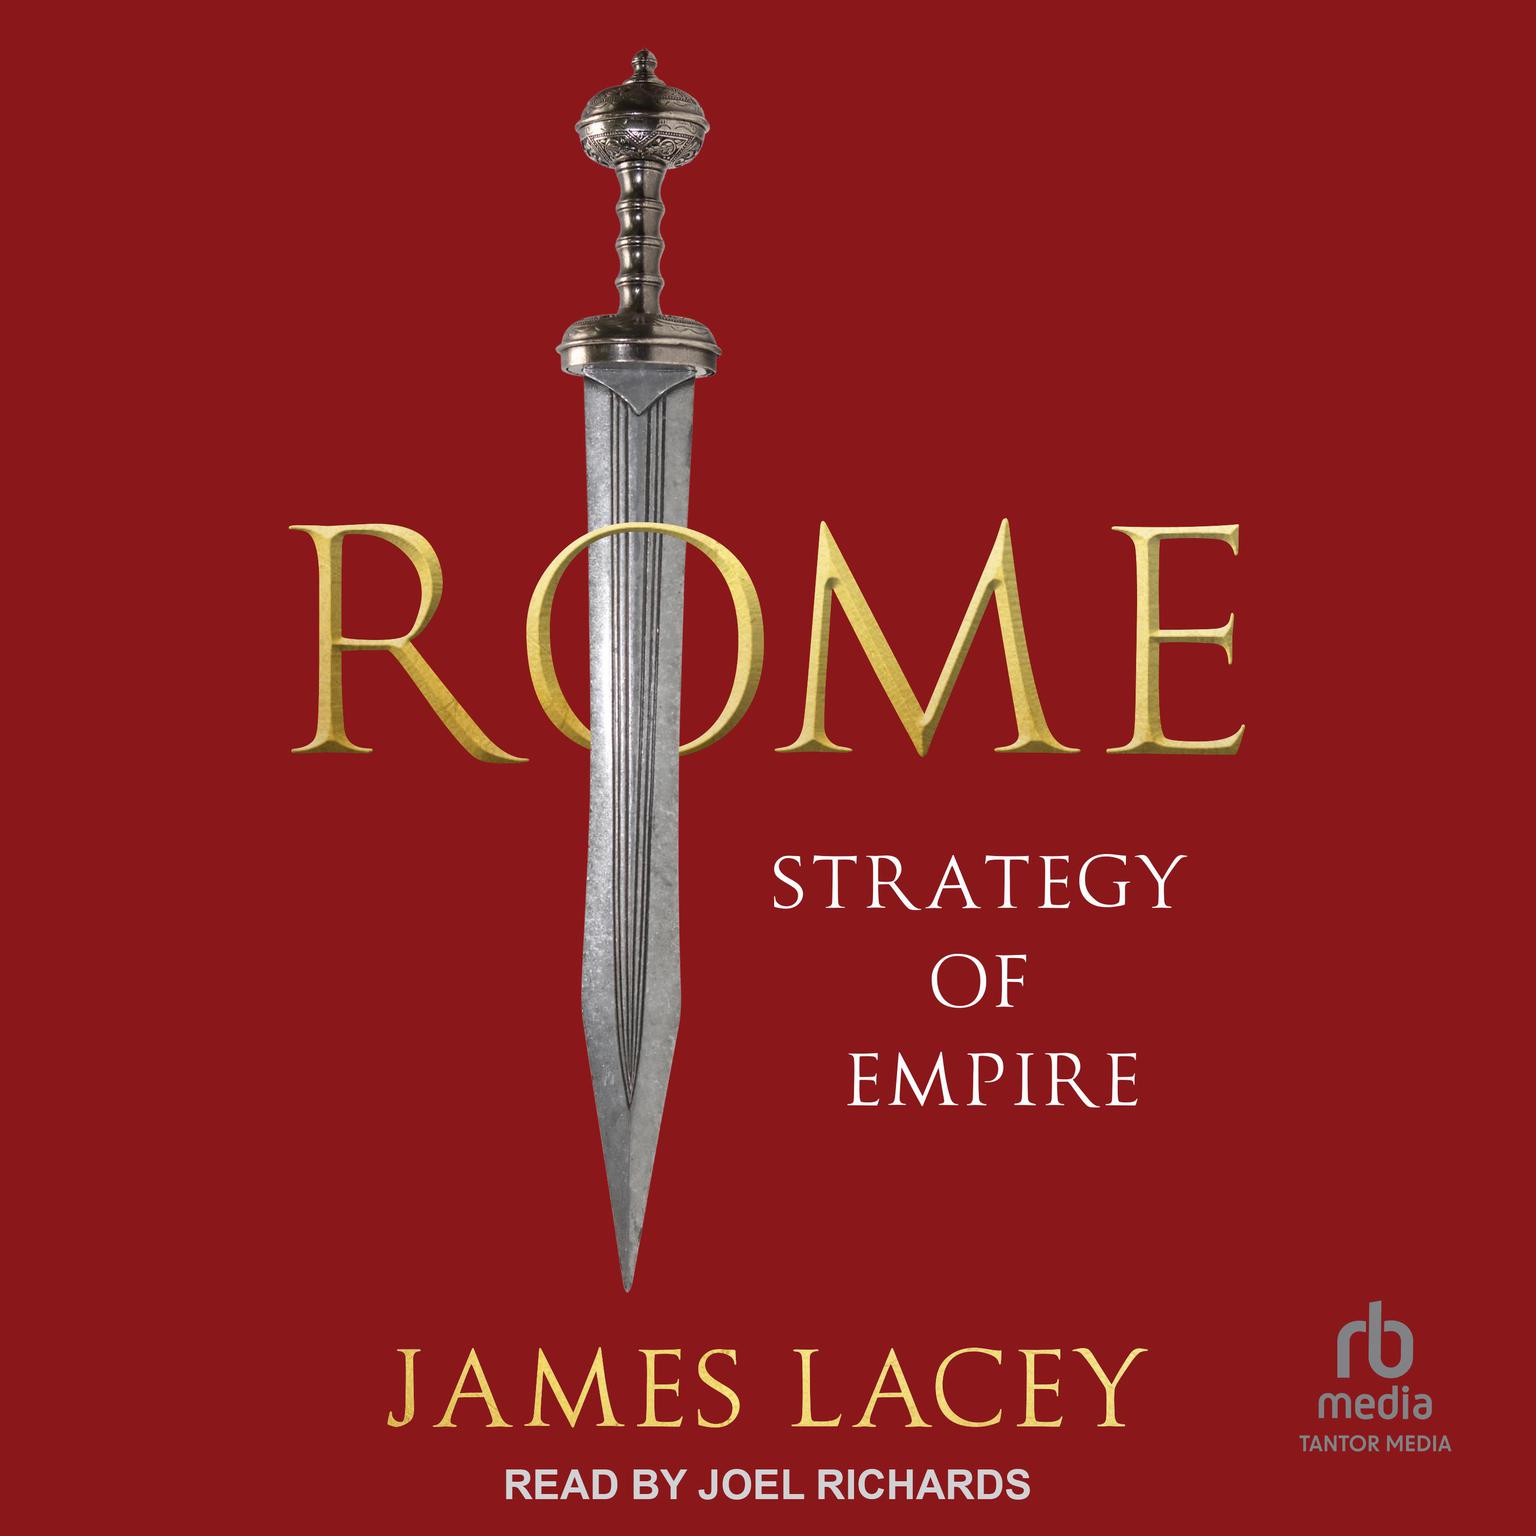 Rome: Strategy of Empire Audiobook, by James Lacey